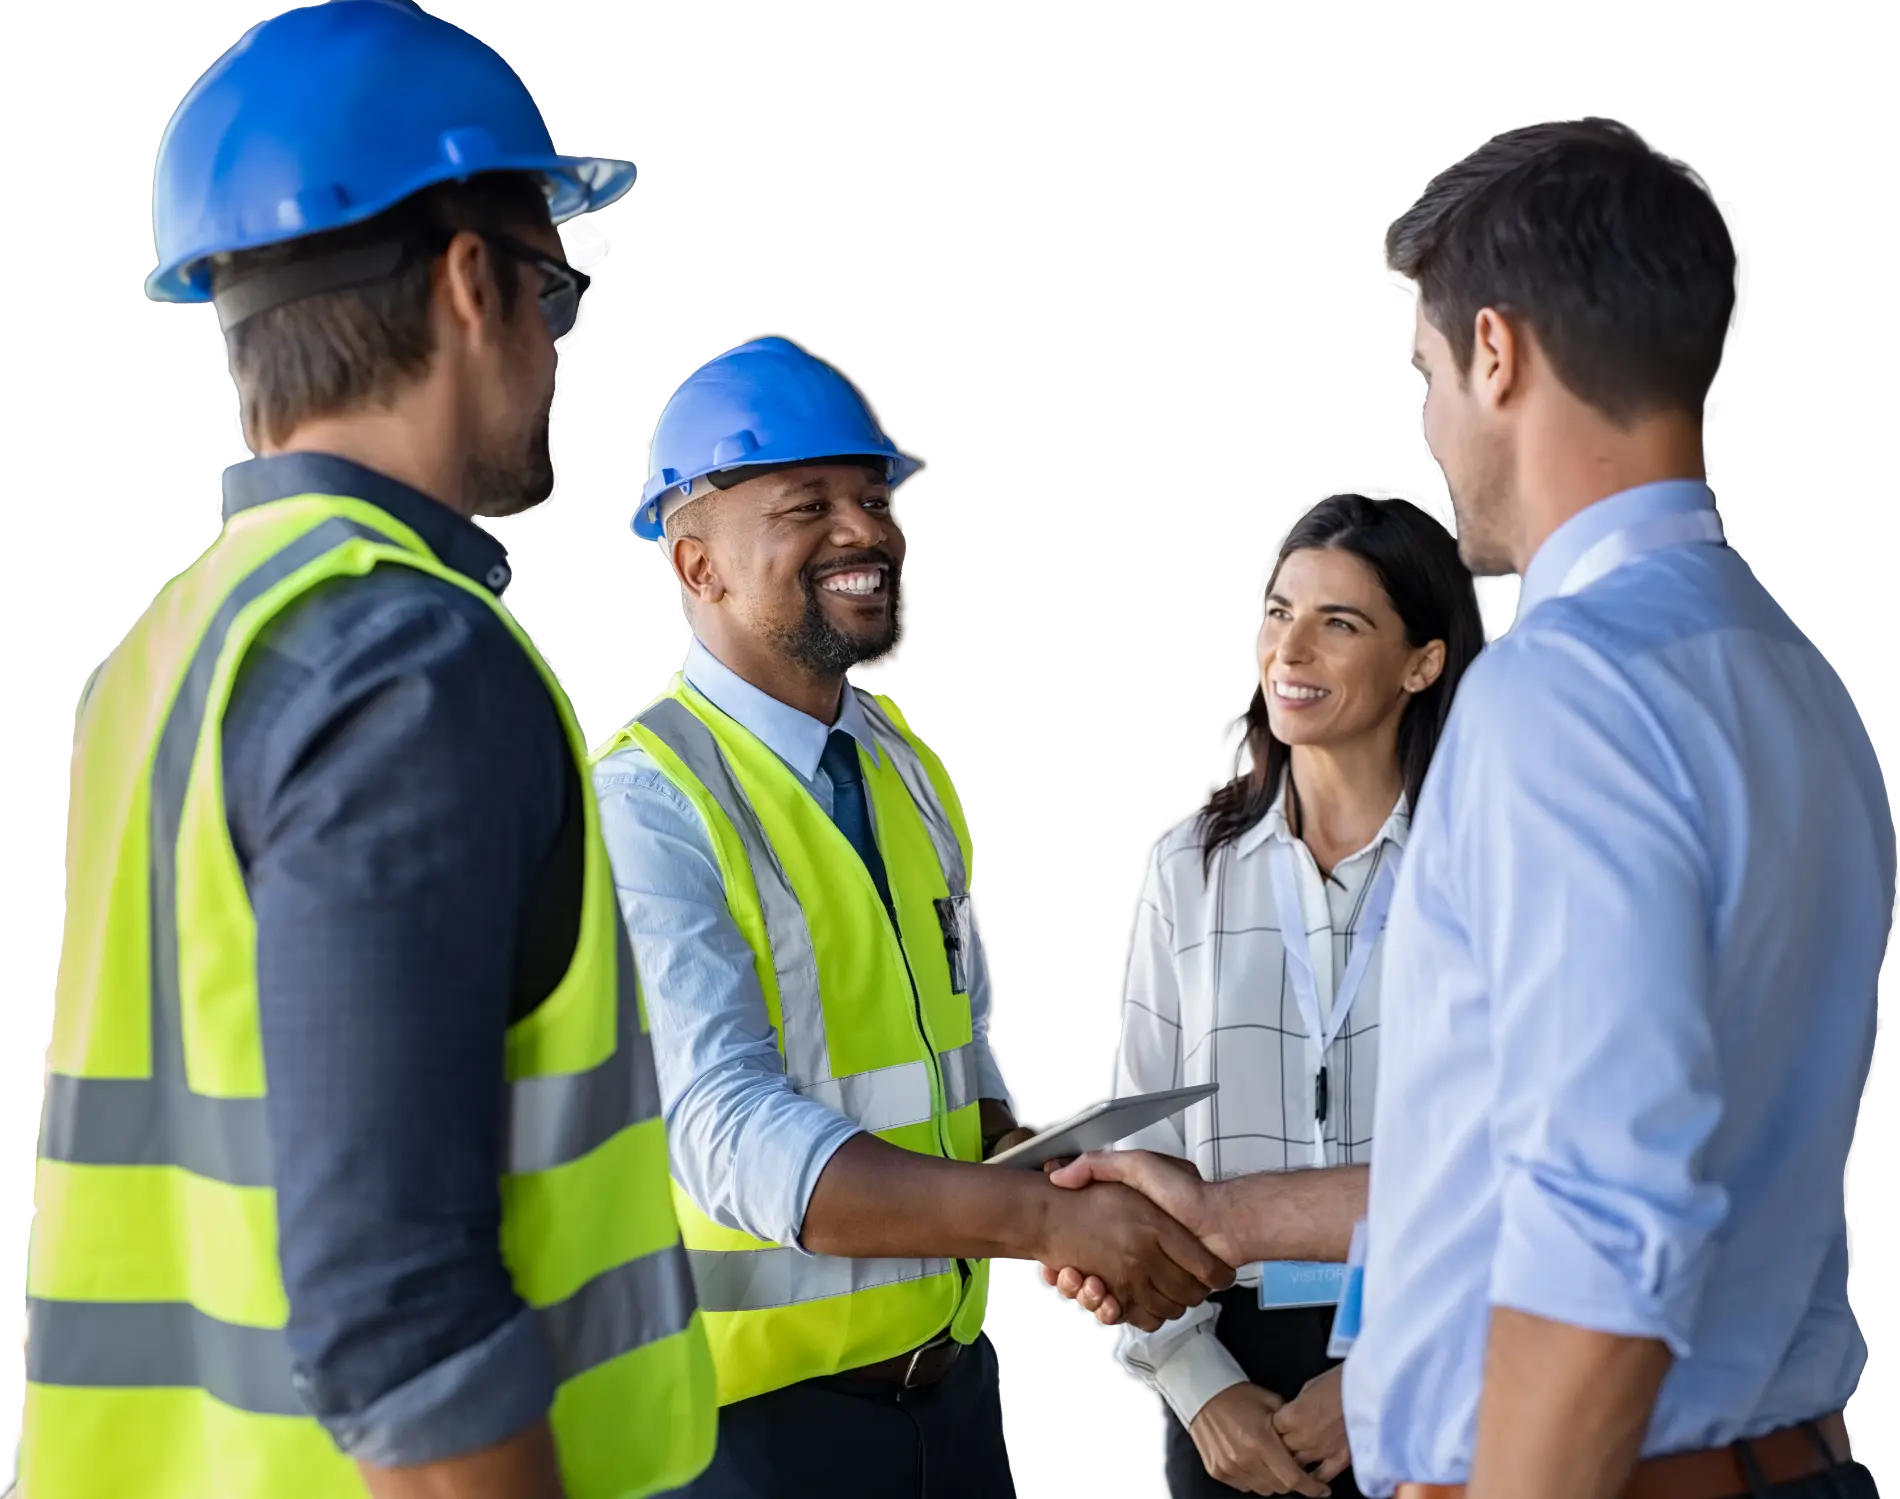 Home-Building Professionals Including Builders, Realtors, Suppliers, and Service Providers Collaborating and Making Deals on the BuildersMeet Platform